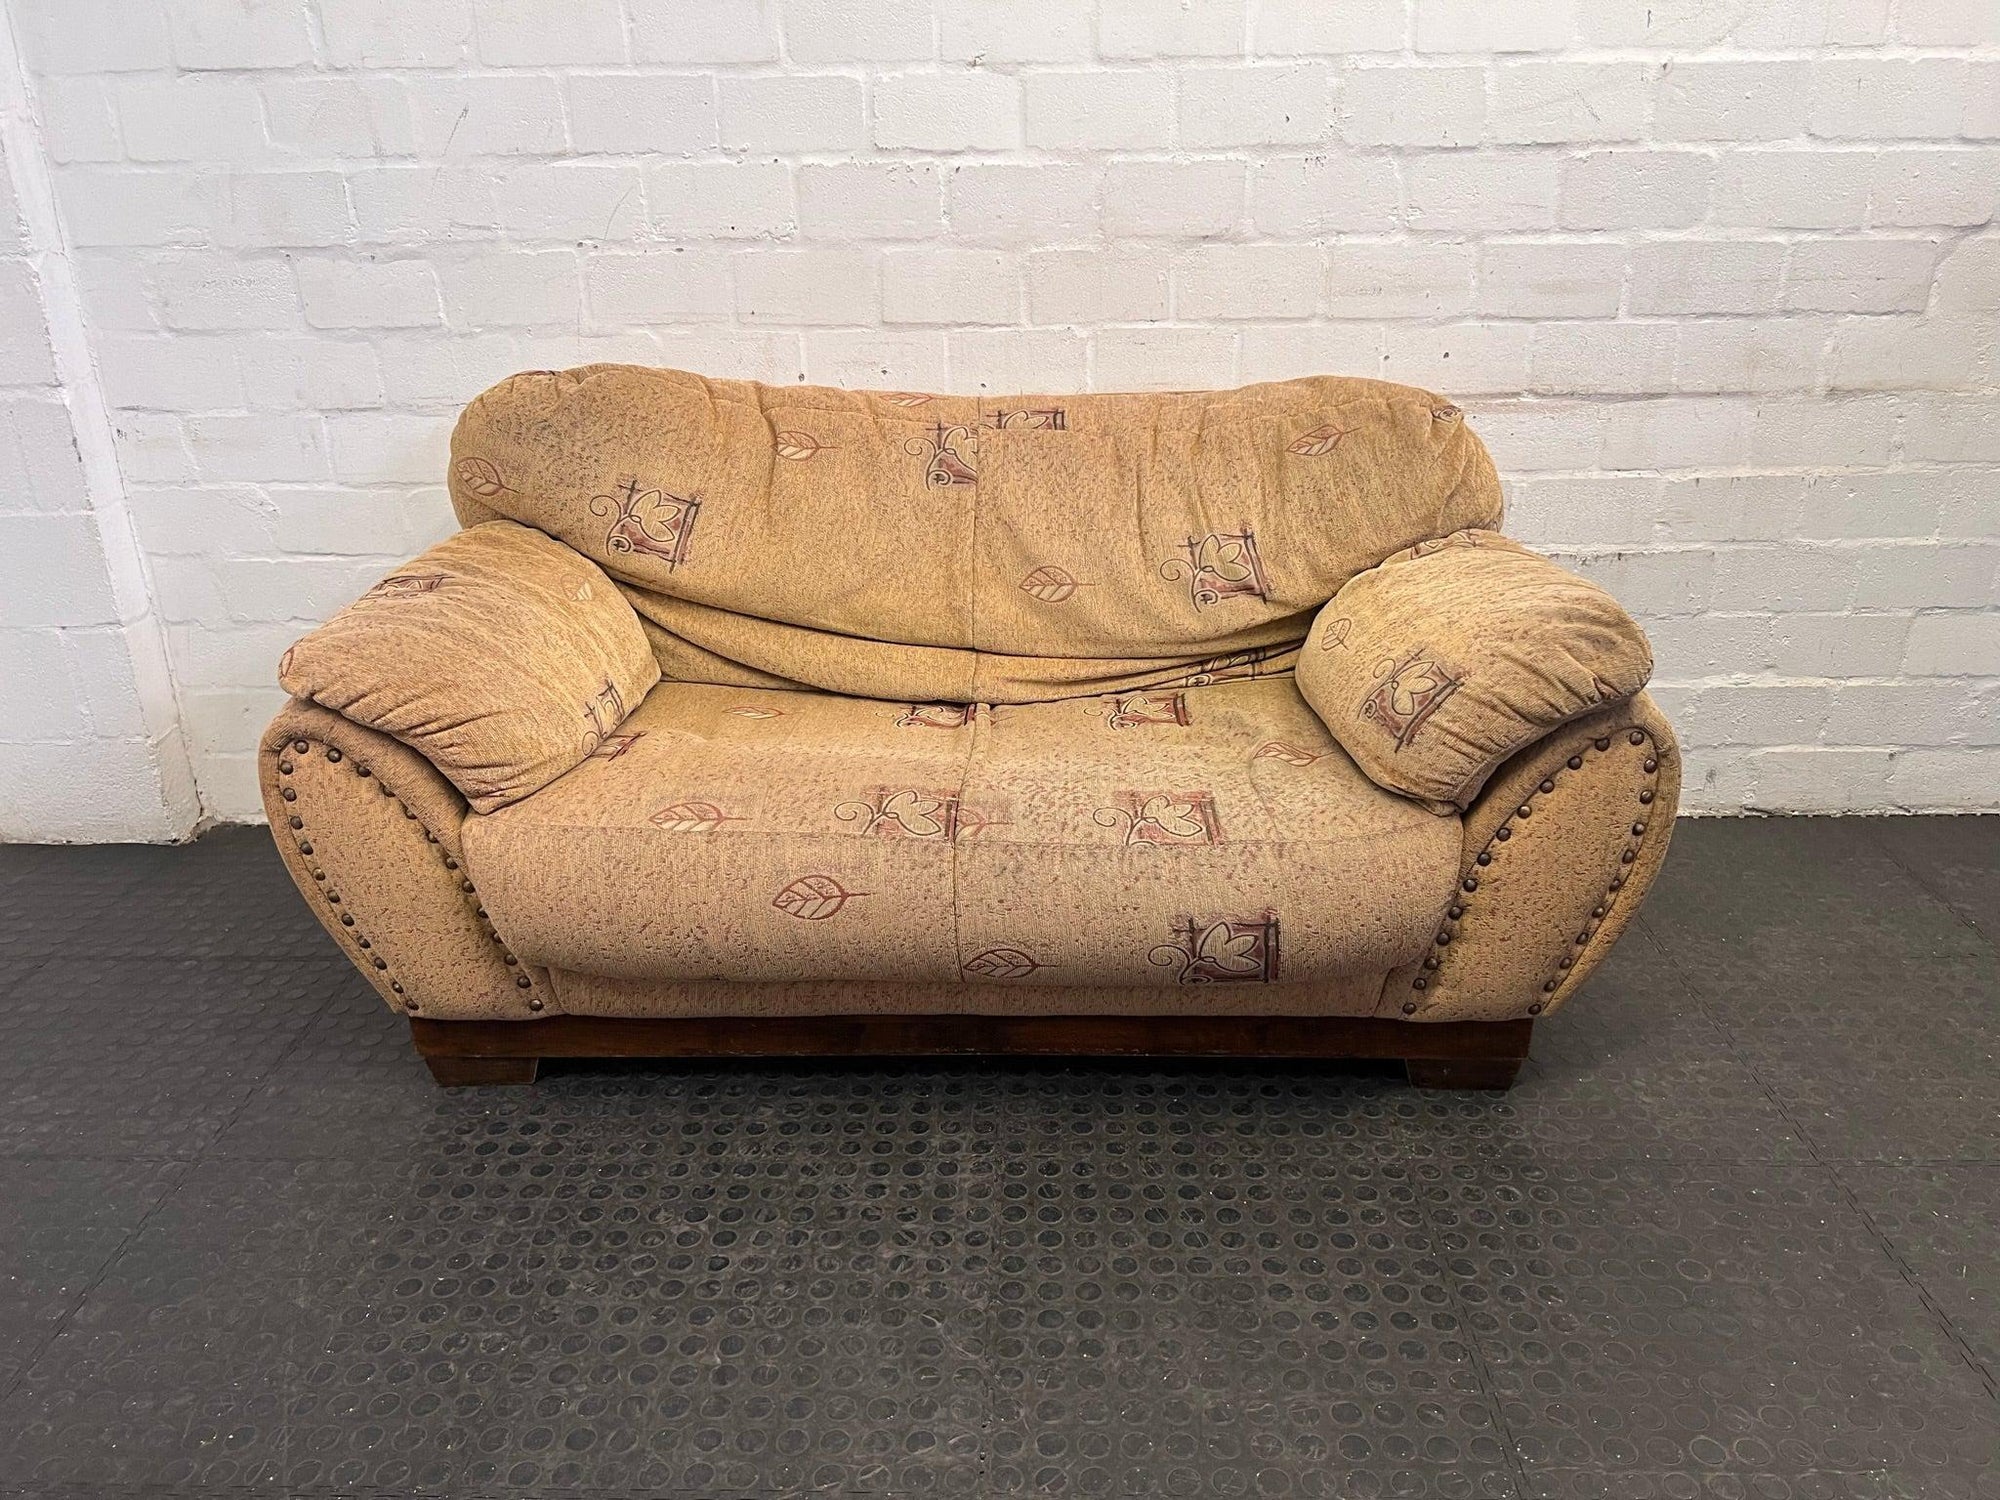 Sandy Brown 2 Seater Couch with Stud and Floral Detailing (Slight Damage Underneath) - REDUCED